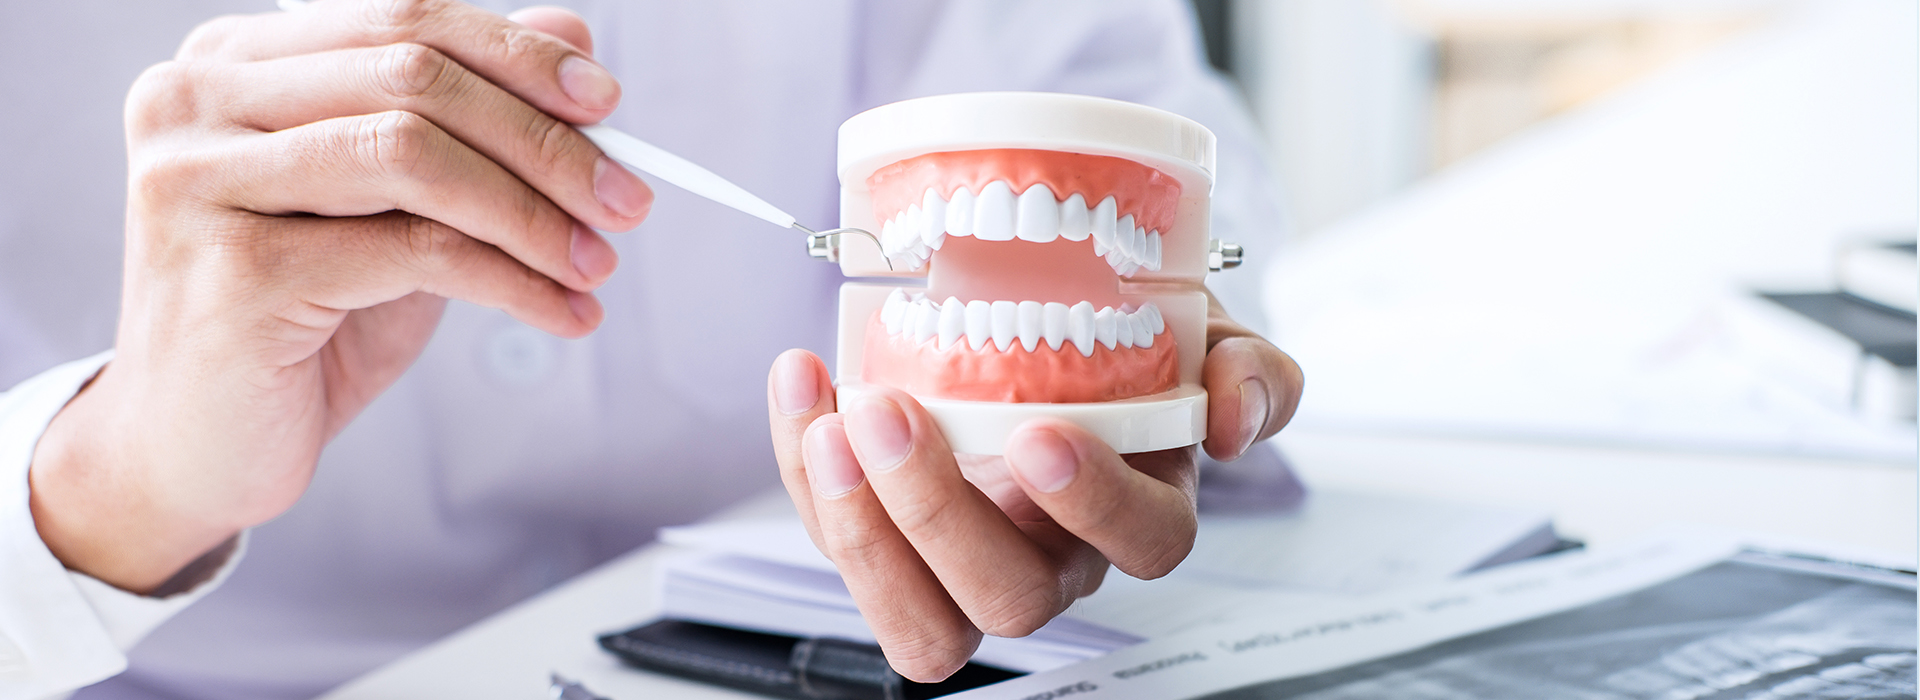 Steger Smiles Family Dentistry | Dentures, Sports Mouthguards and Night Guards